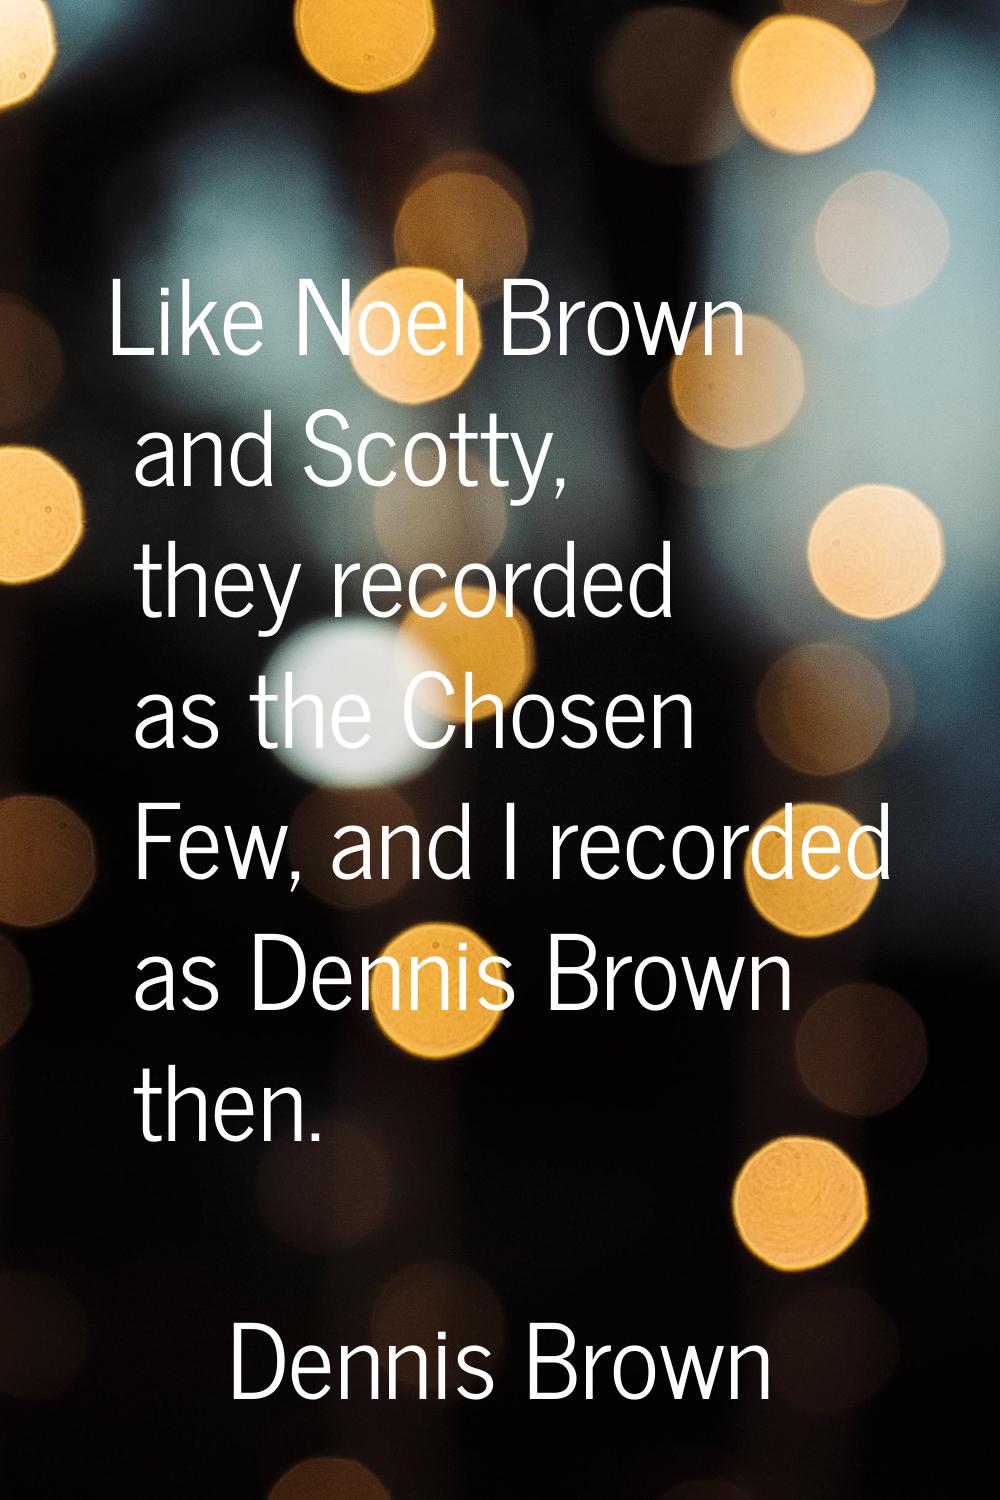 Like Noel Brown and Scotty, they recorded as the Chosen Few, and I recorded as Dennis Brown then.